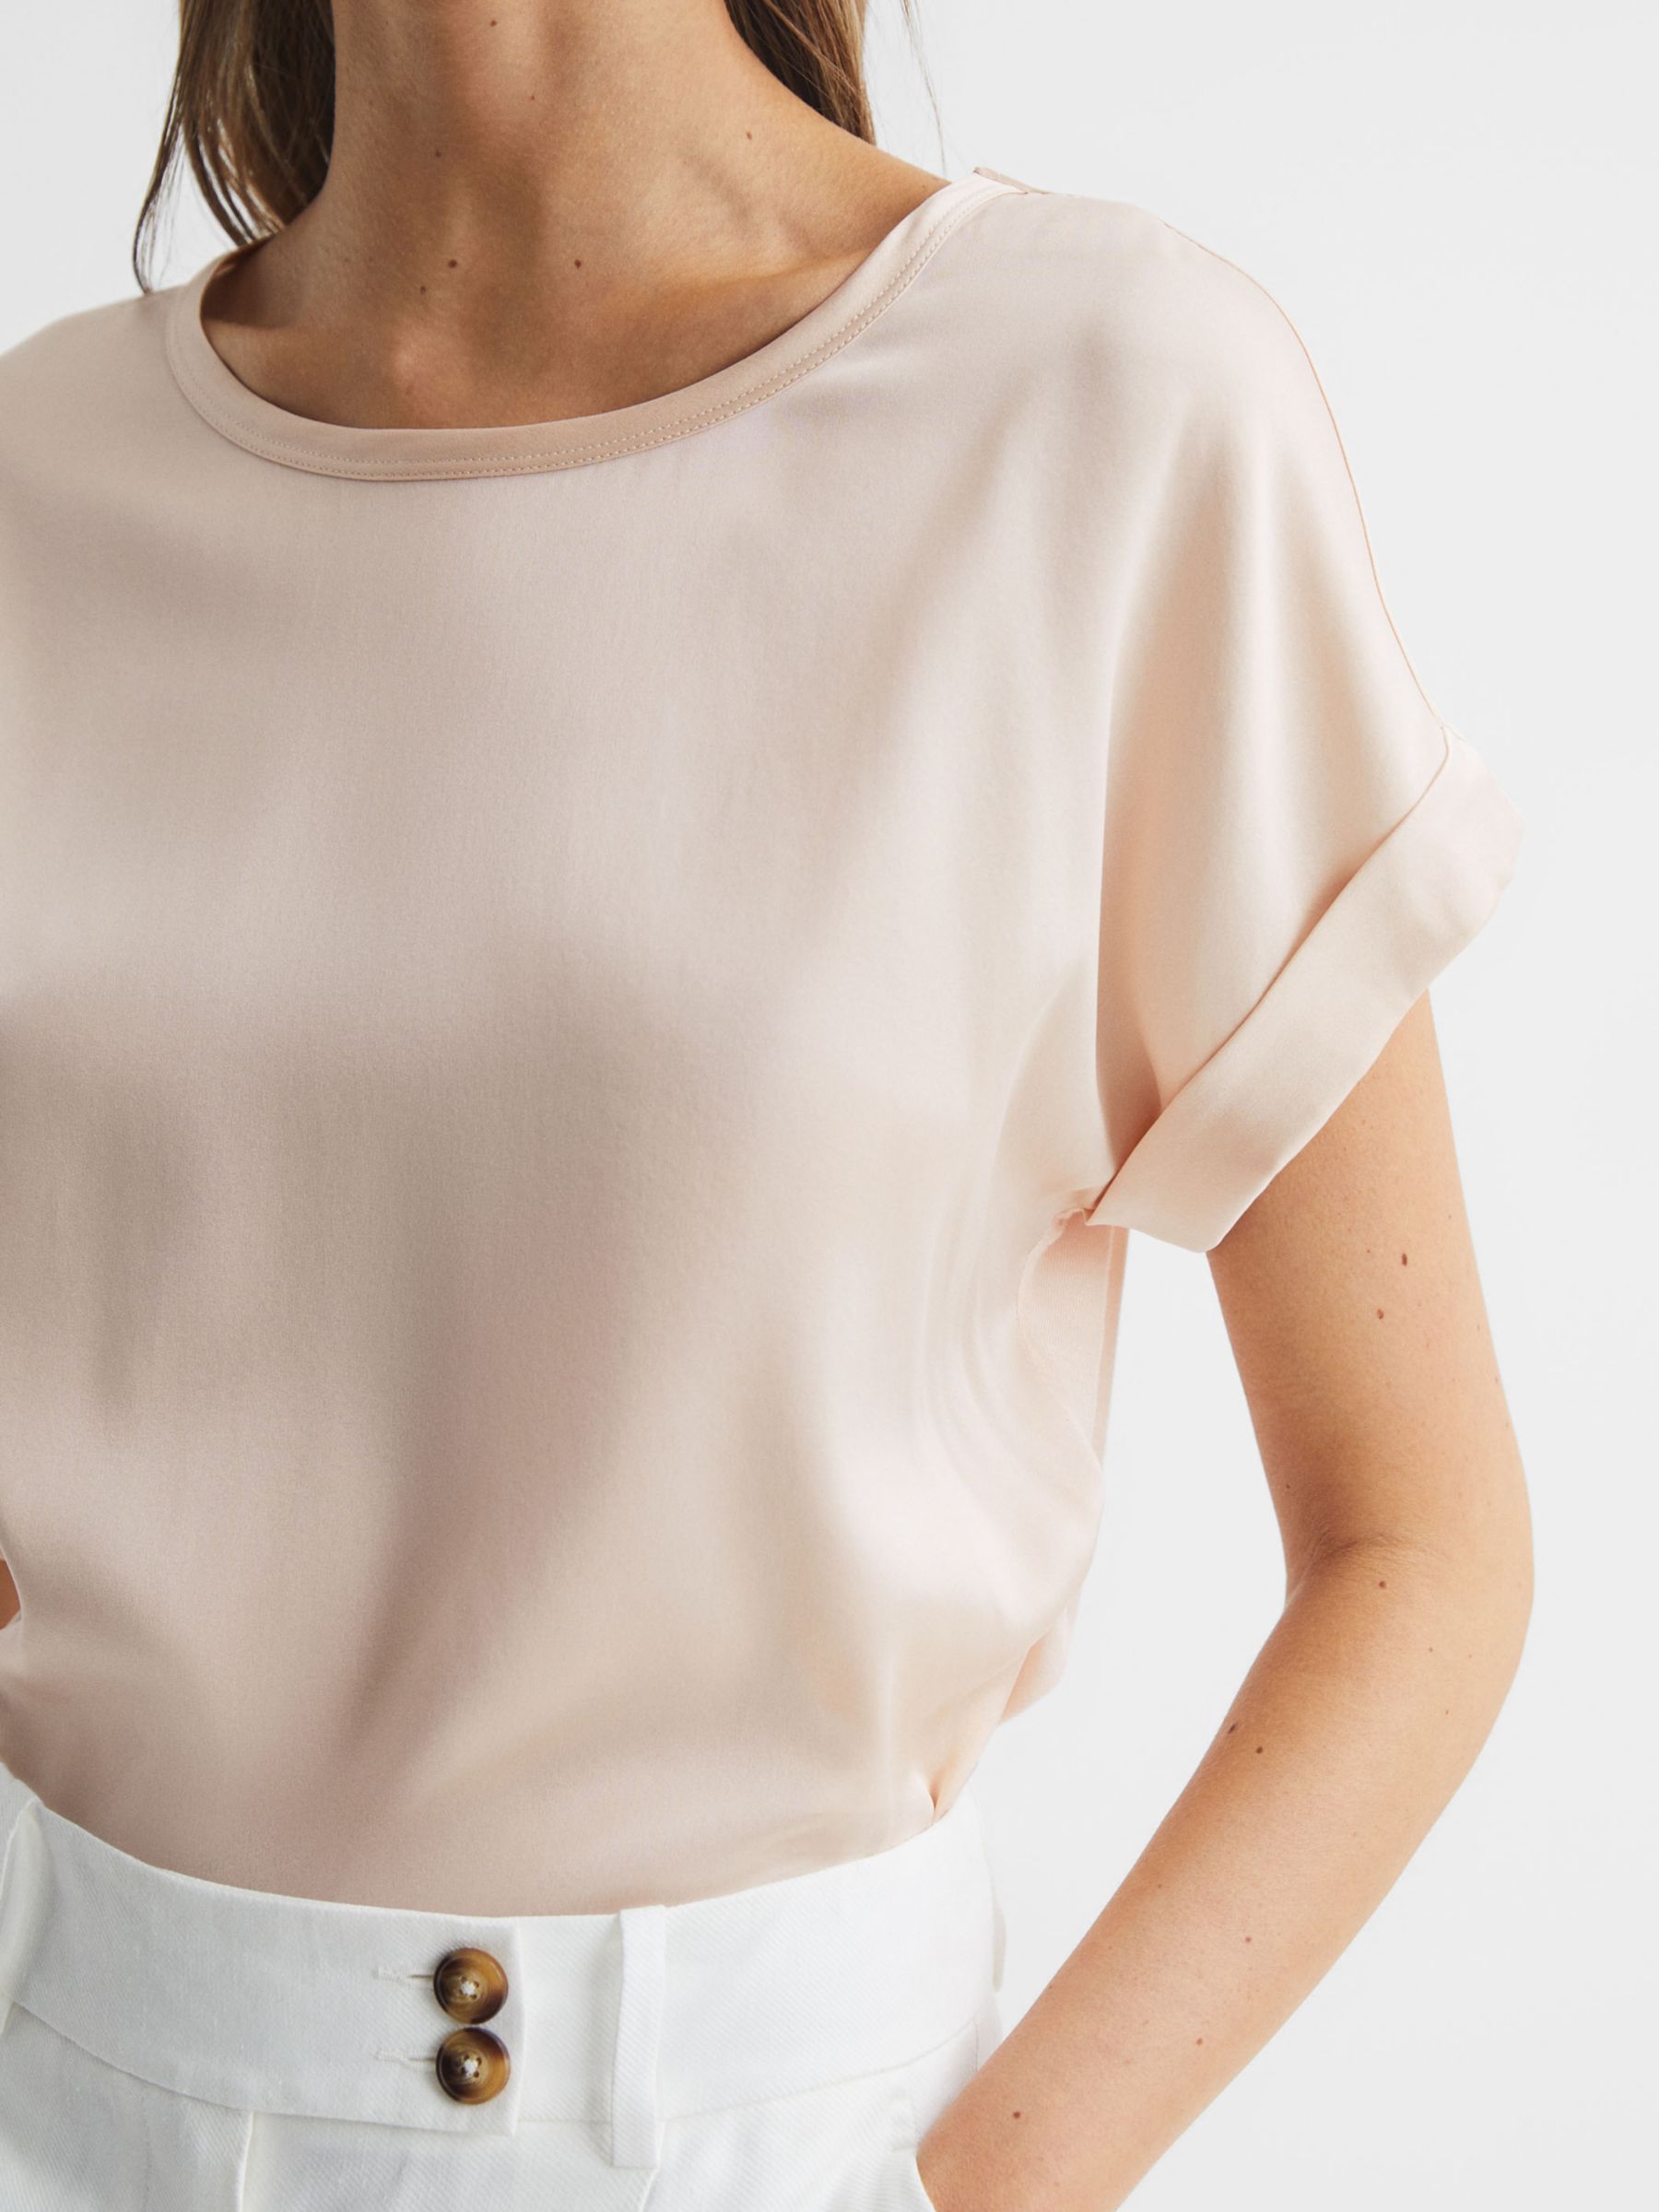 ligegyldighed Mos forbi Reiss Helen Silk Front T-Shirt, Nude at John Lewis & Partners